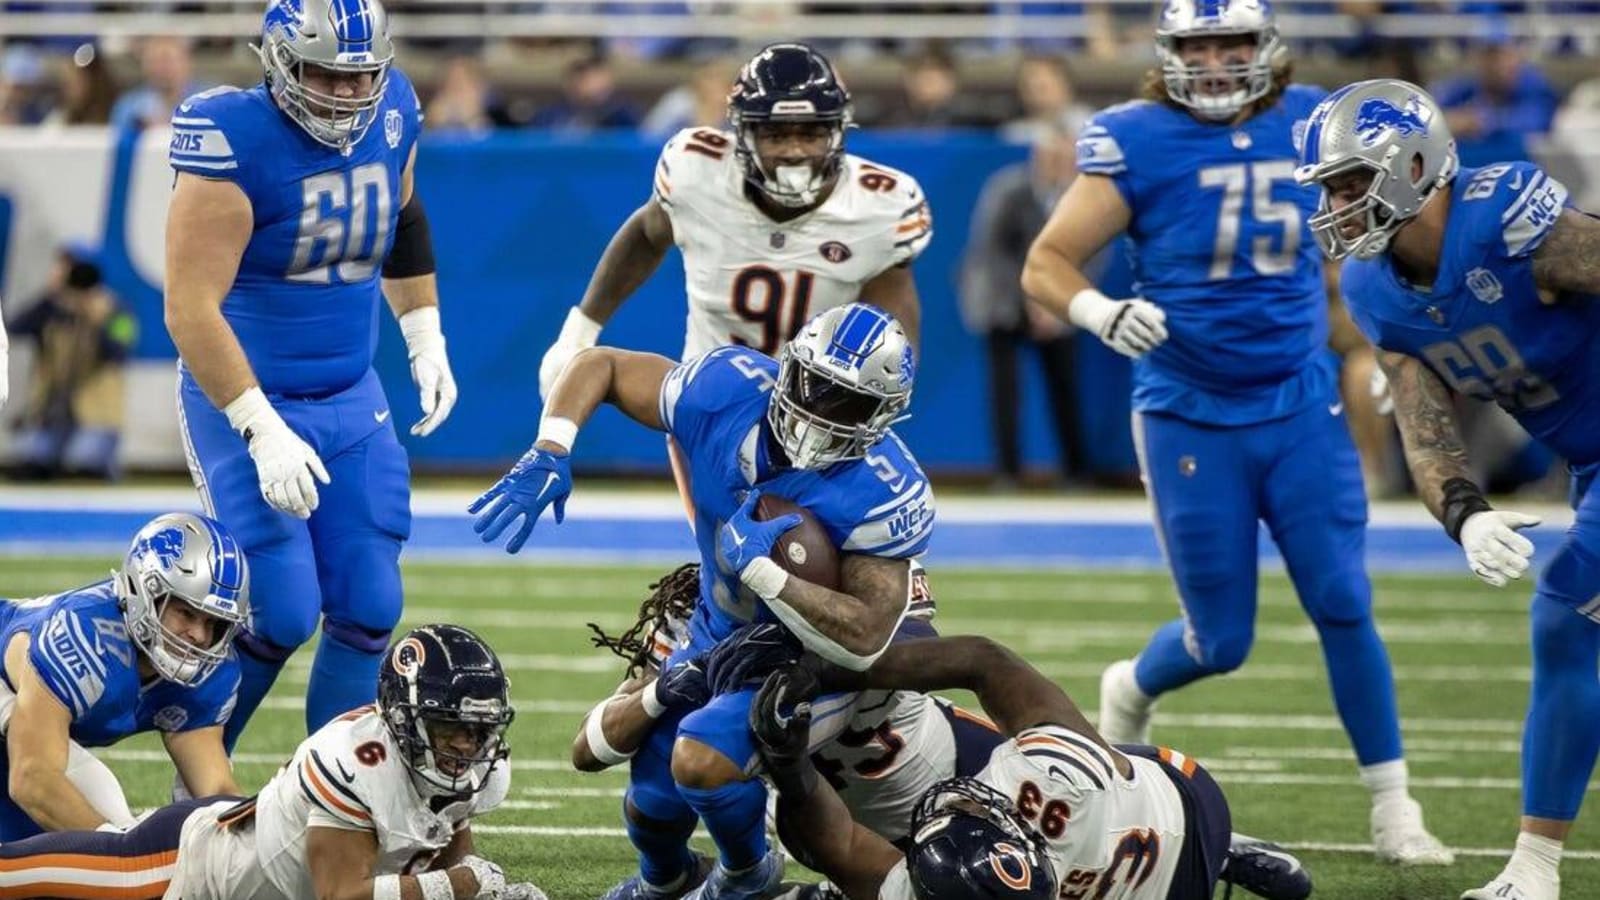 Lions rally in fourth quarter to upend Bears